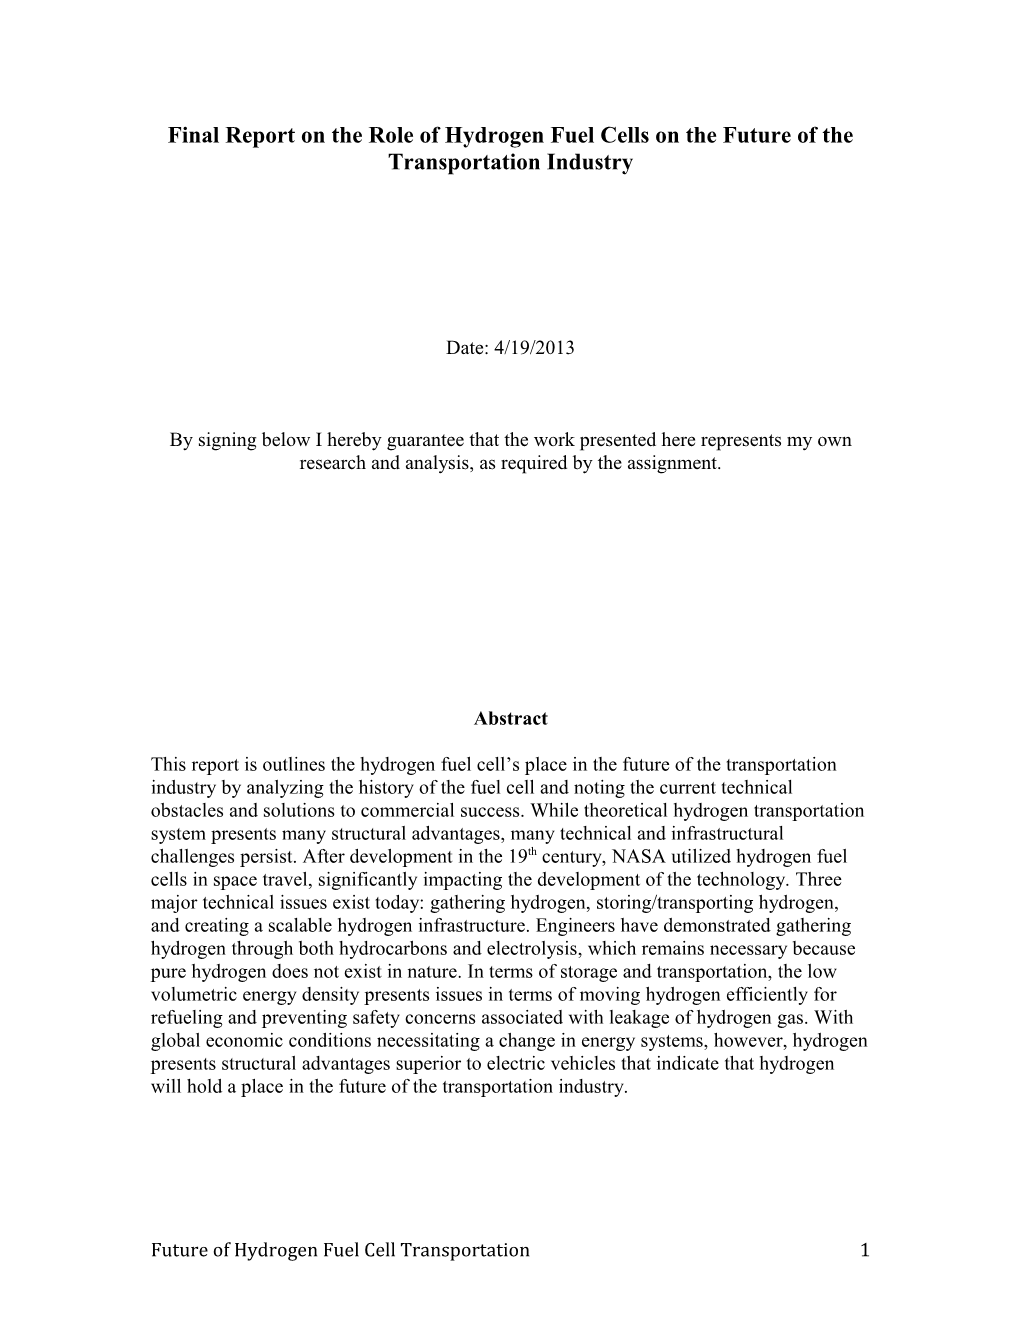 Final Report on the Role of Hydrogen Fuel Cells on the Future of the Transportation Industry